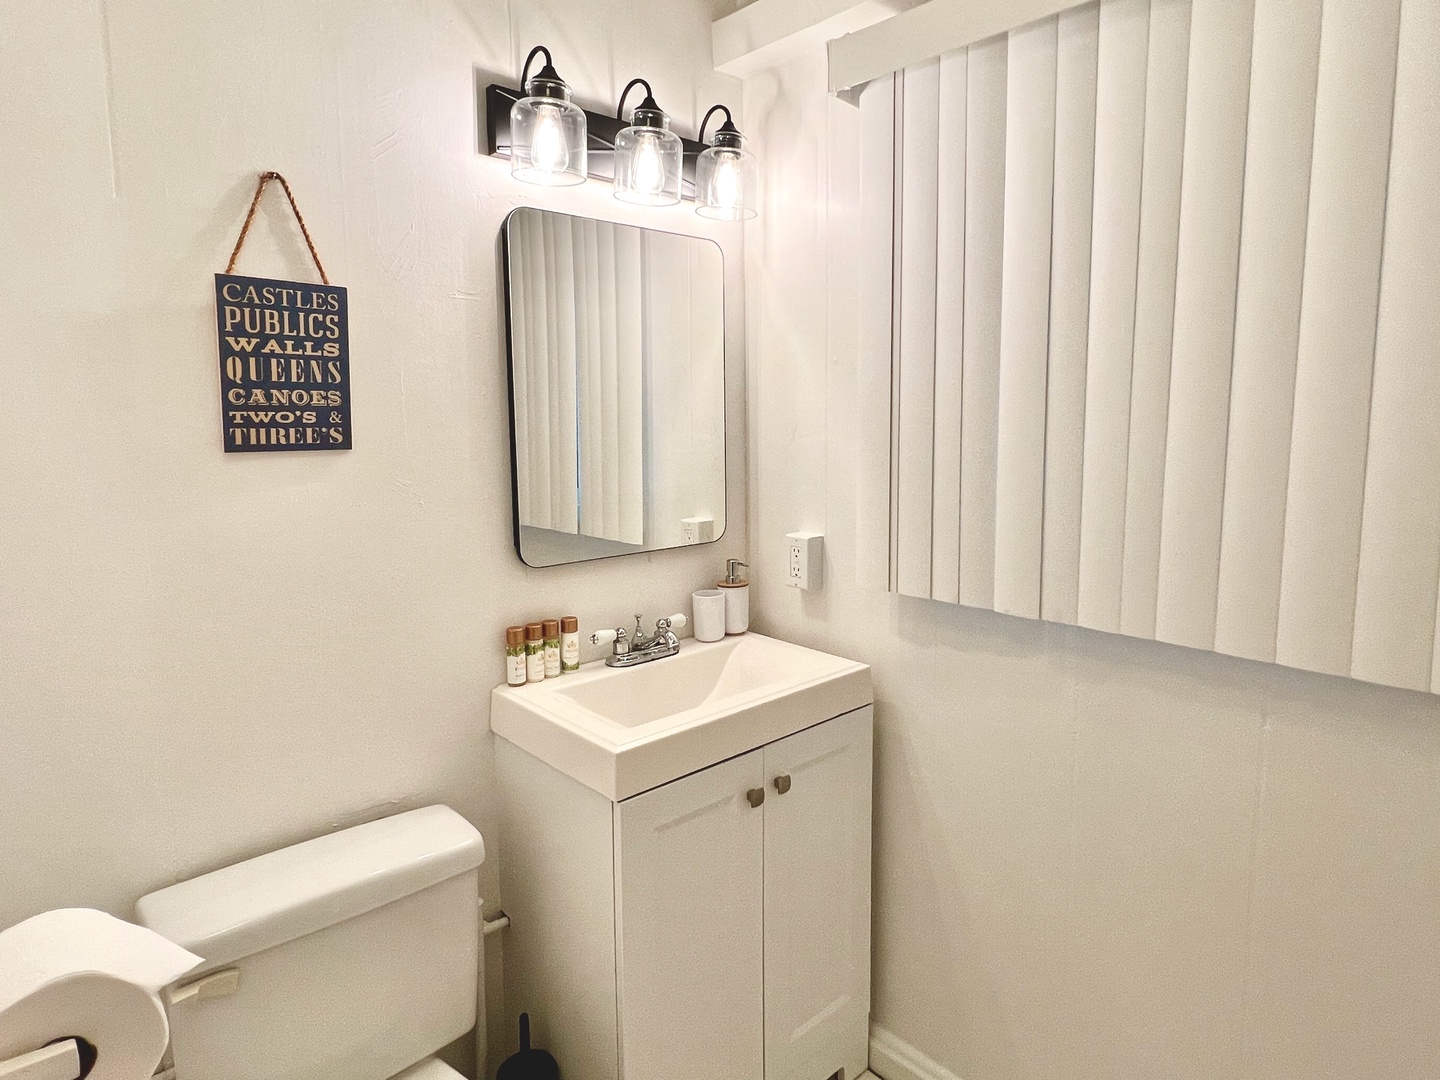 Honolulu Vacation Rentals, Ho'okipa Villa - Shared bath for bedrooms one and two